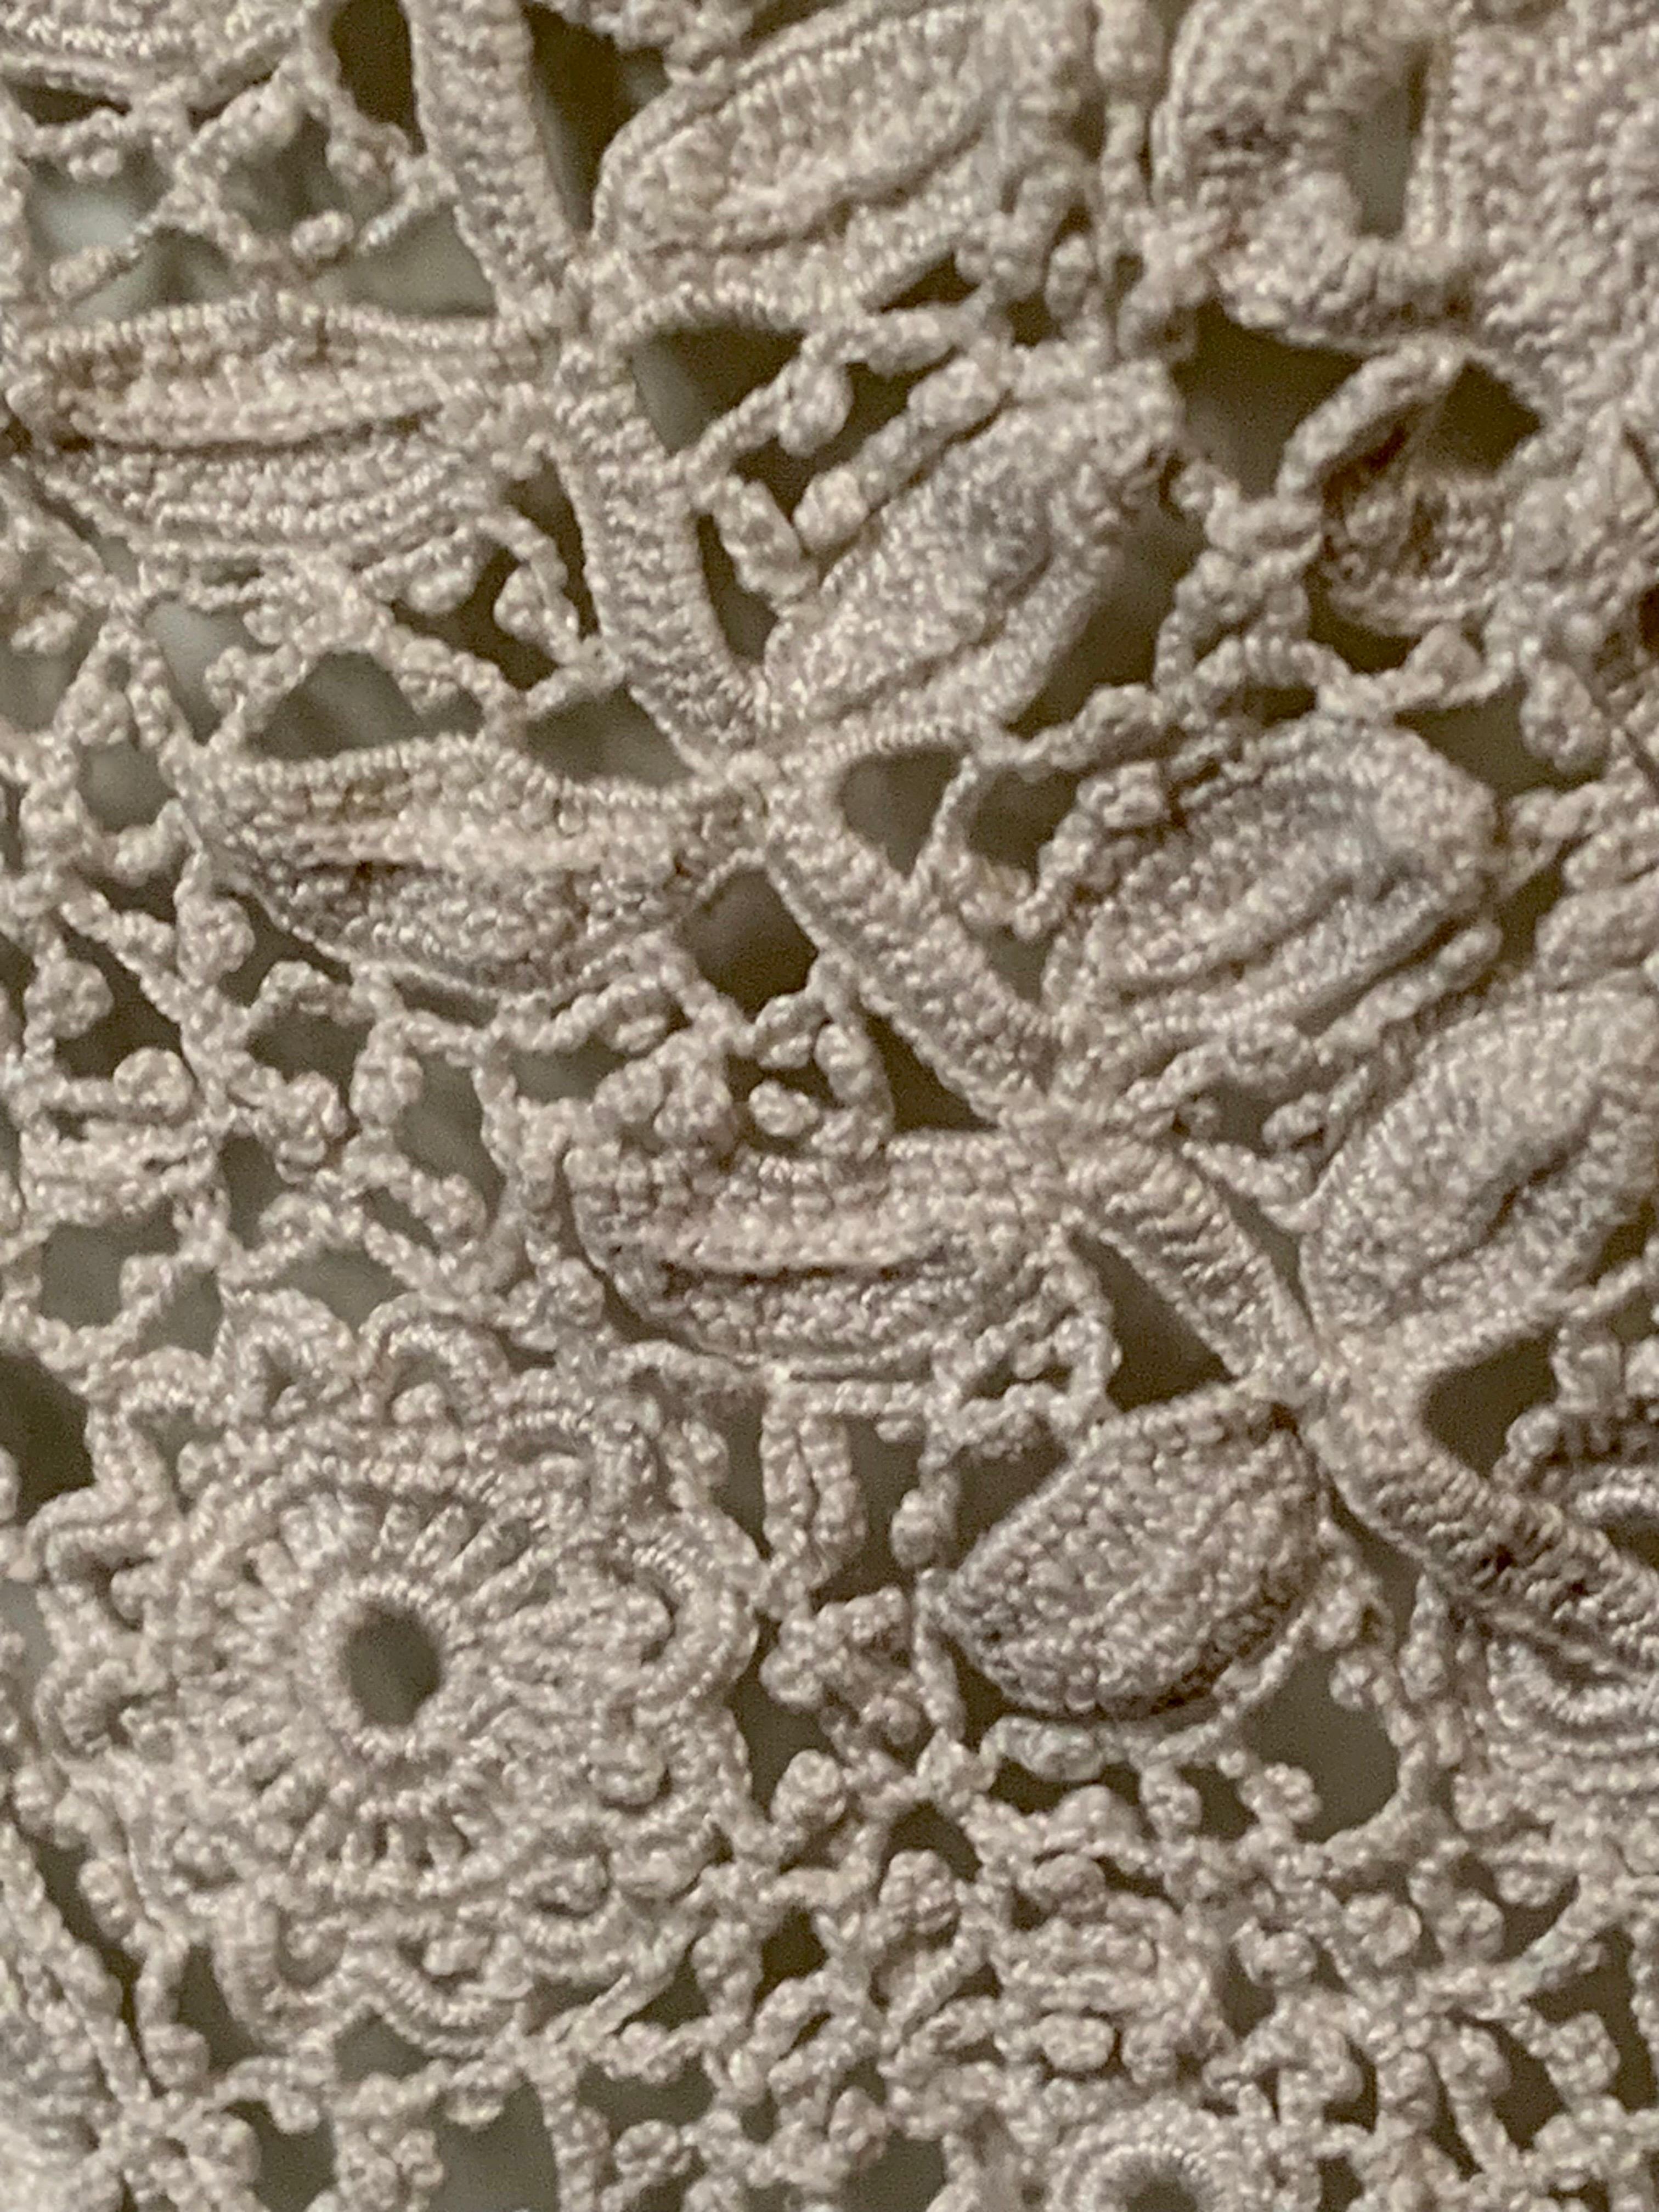 Antique Hand Crocheted Irish Lace Blouse with Flowers and Shamrocks 14